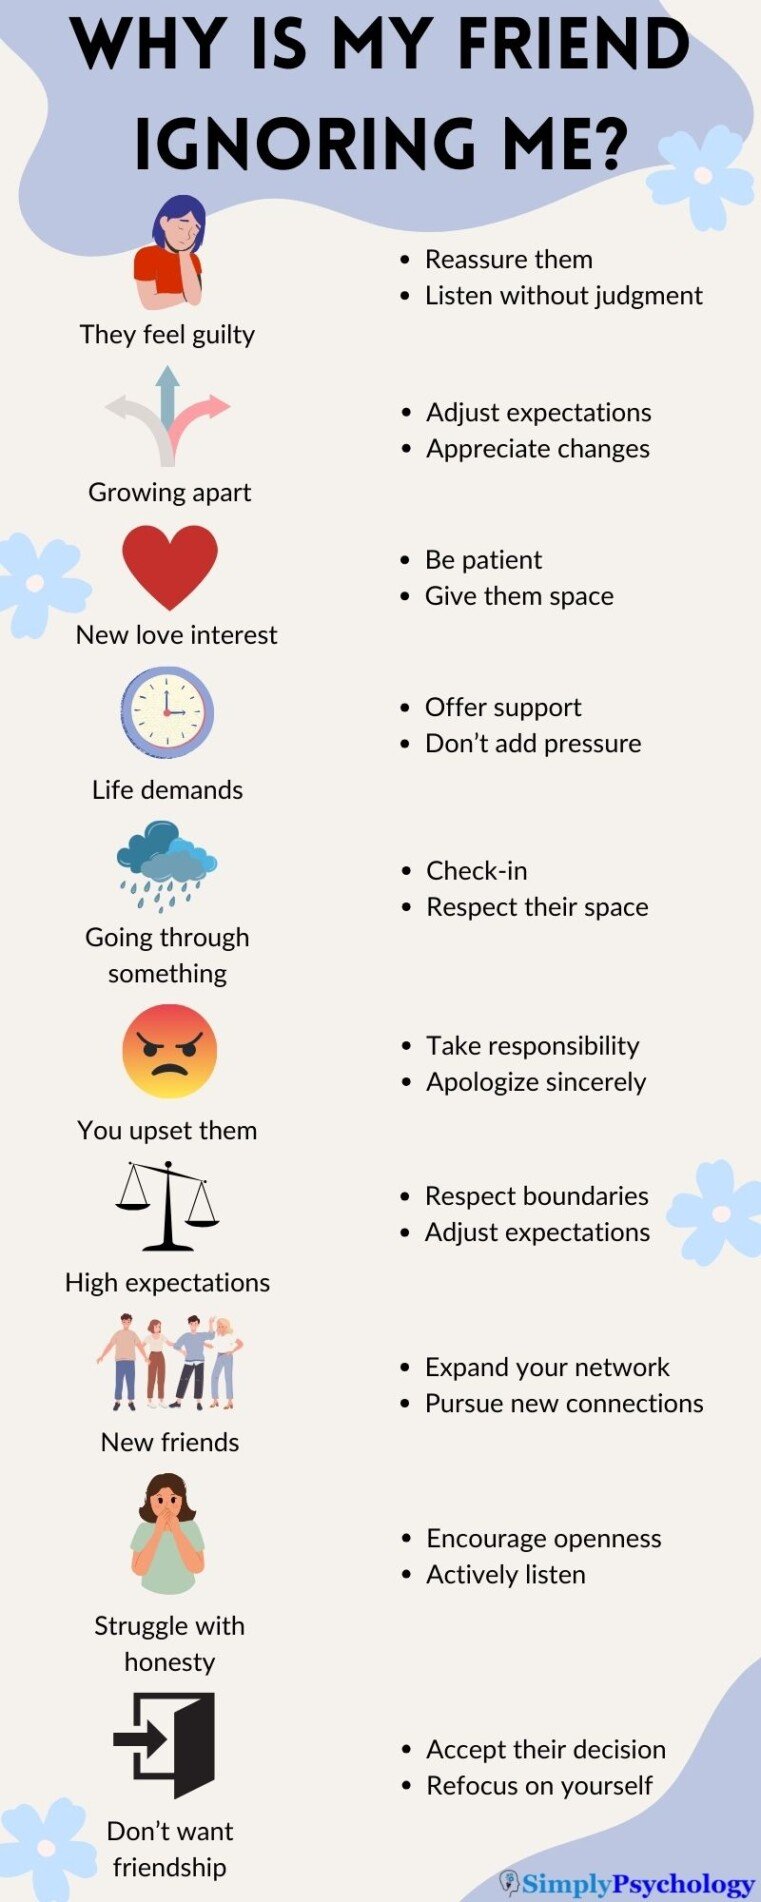 An infographic indicating possible reasons why a friend may be ignoring you and what you can do about it